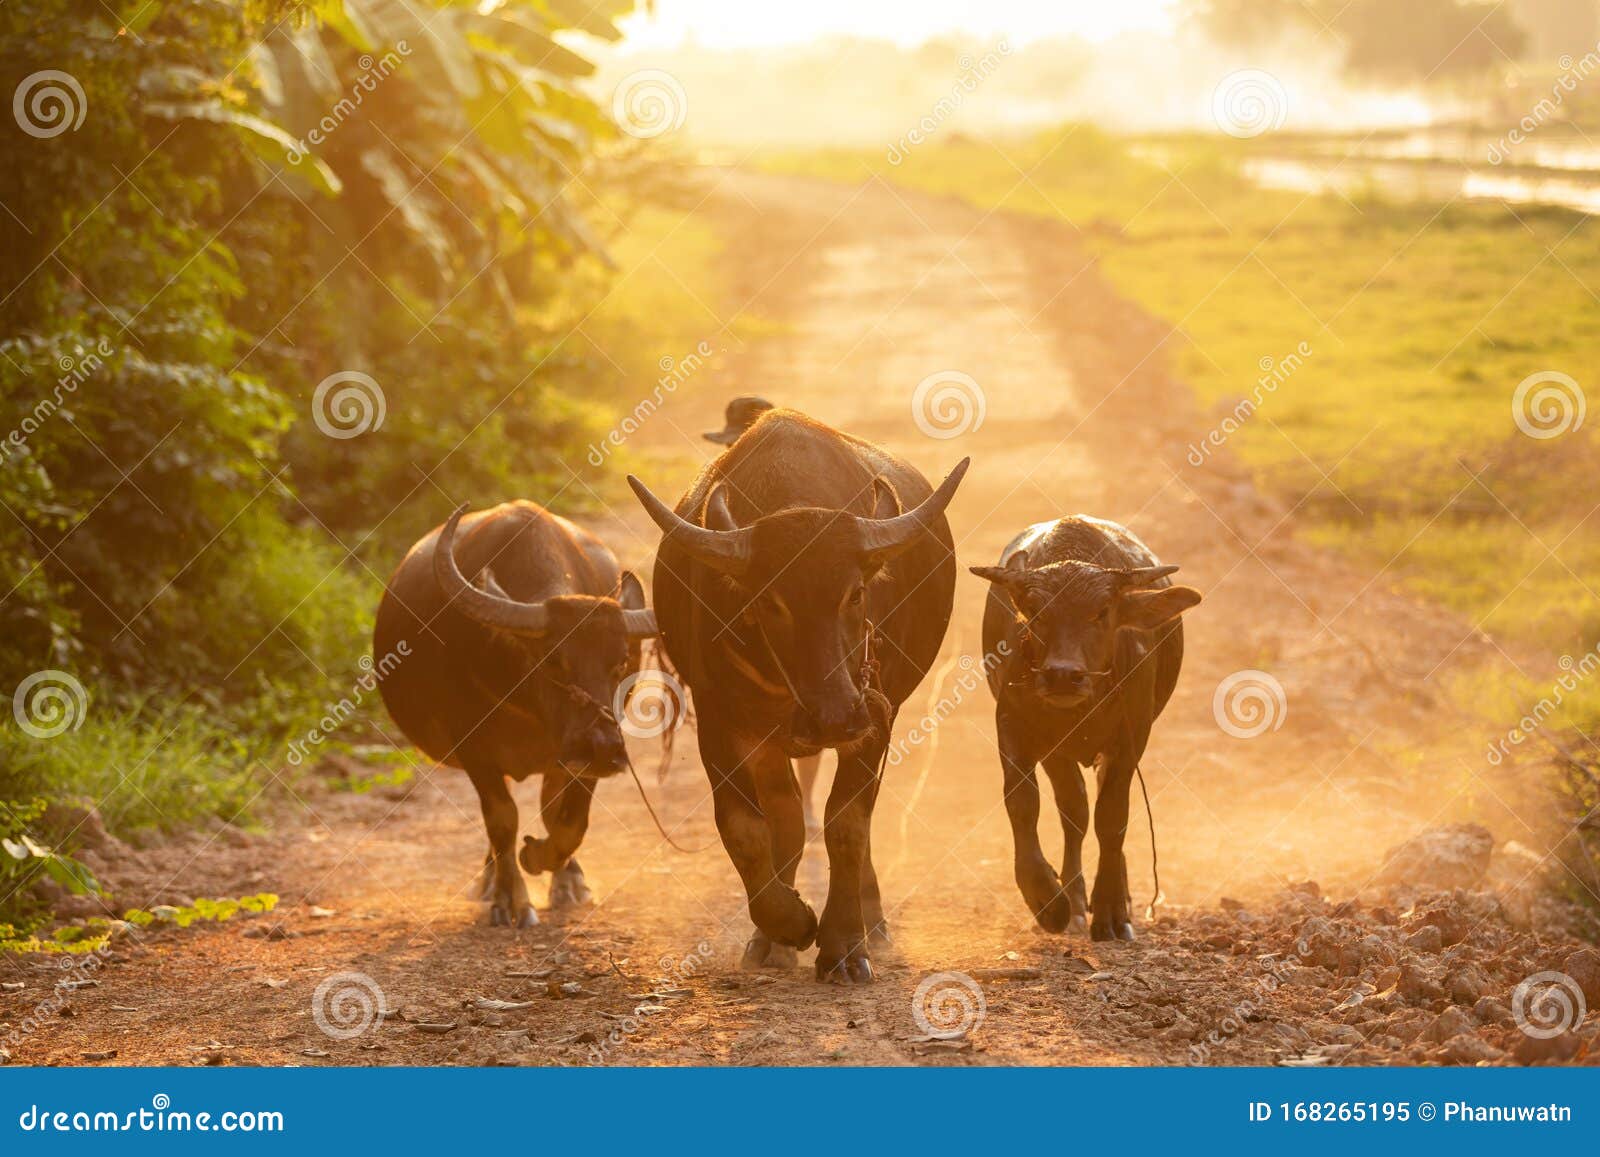 Thai Black Buffalo Walking on the Road at Countryside in Evening Stock Image Image of farmer: 168265195